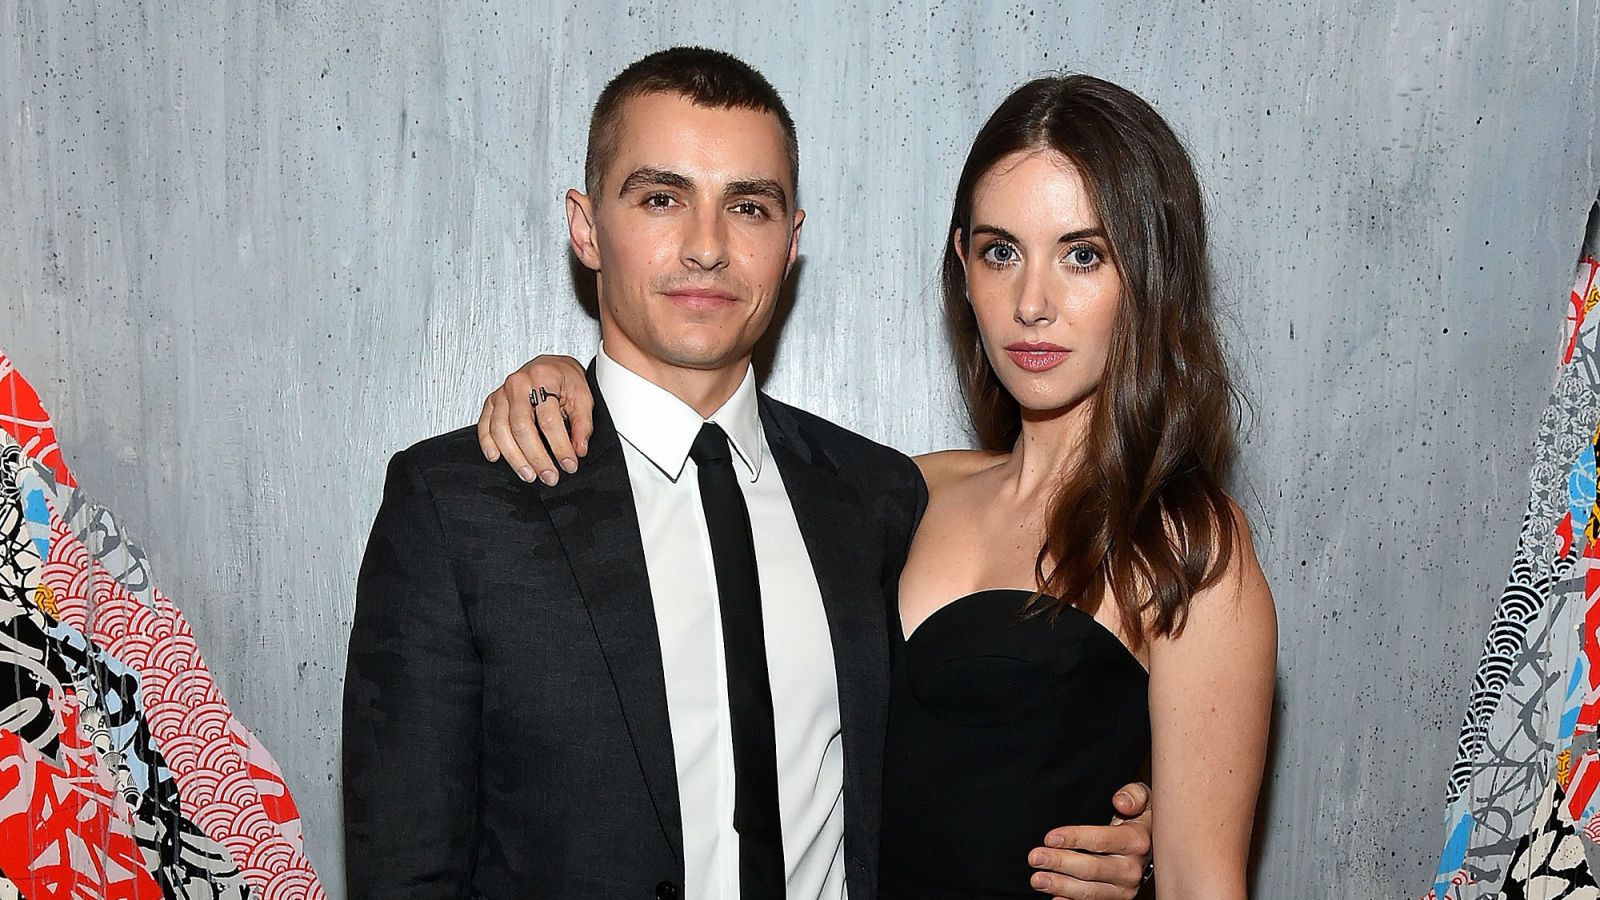 Alison Brie and Dave Franco's Relationship Timeline